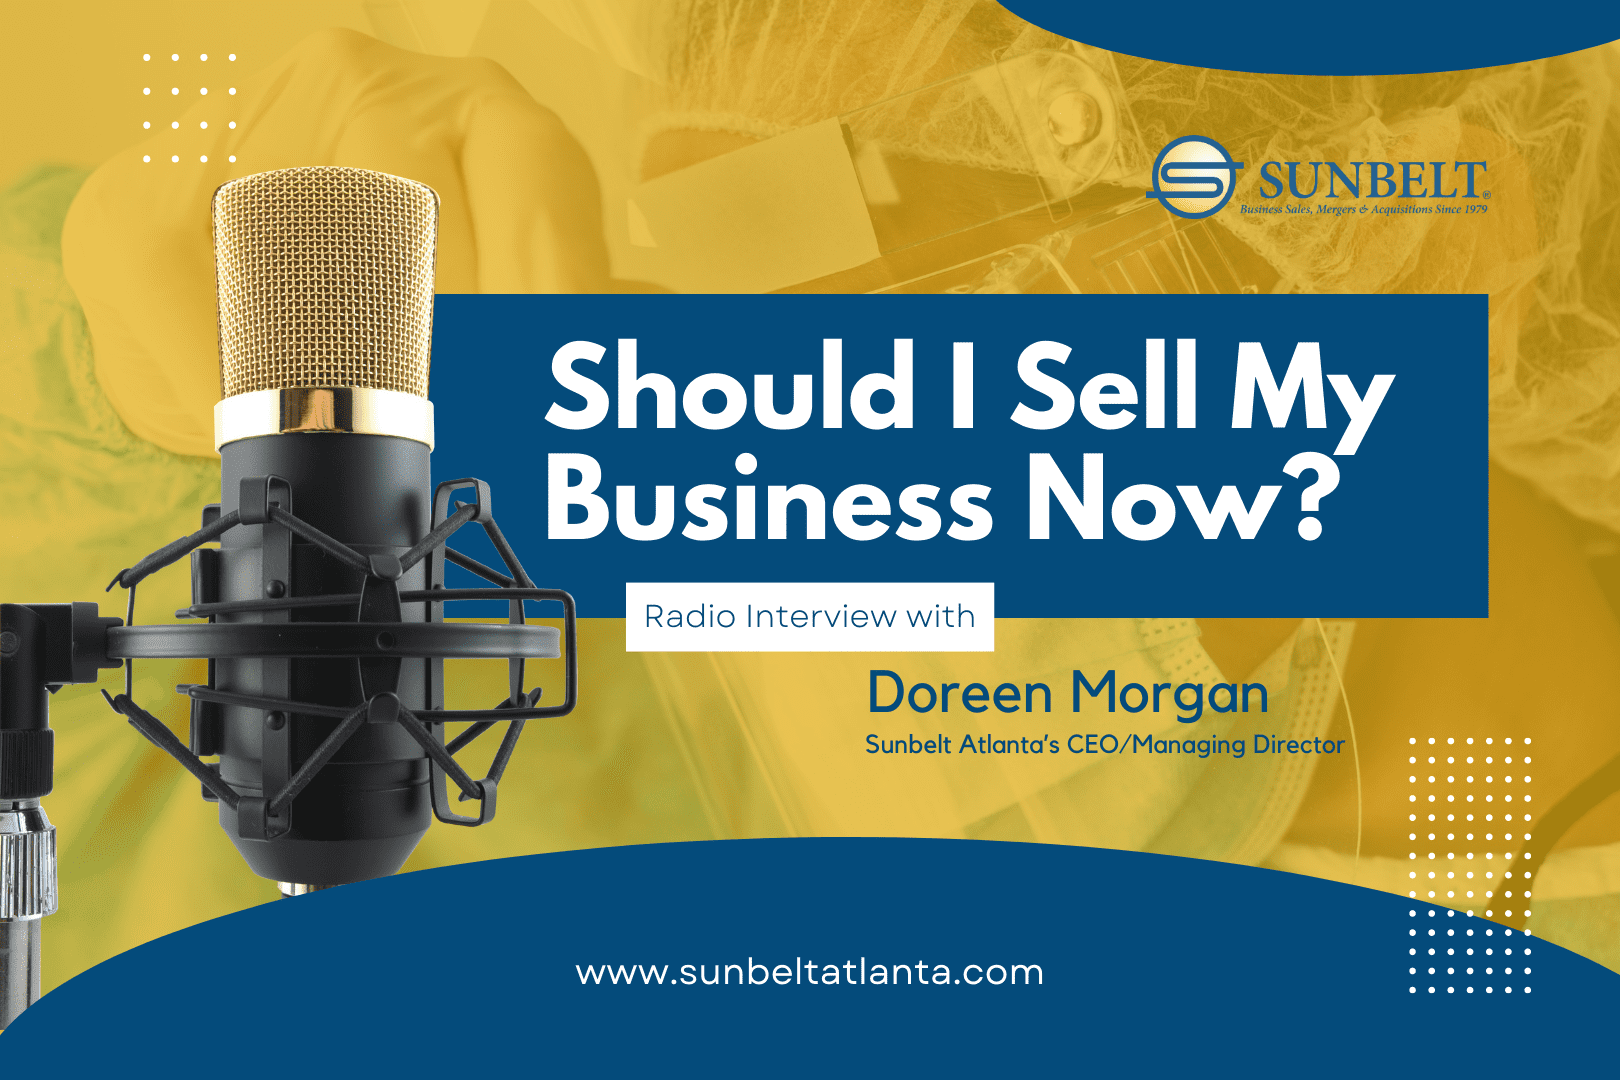 Sunbelt Atlanta Radio Interview: Should I Sell My Business Now or Wait Until the Pandemic Ends?